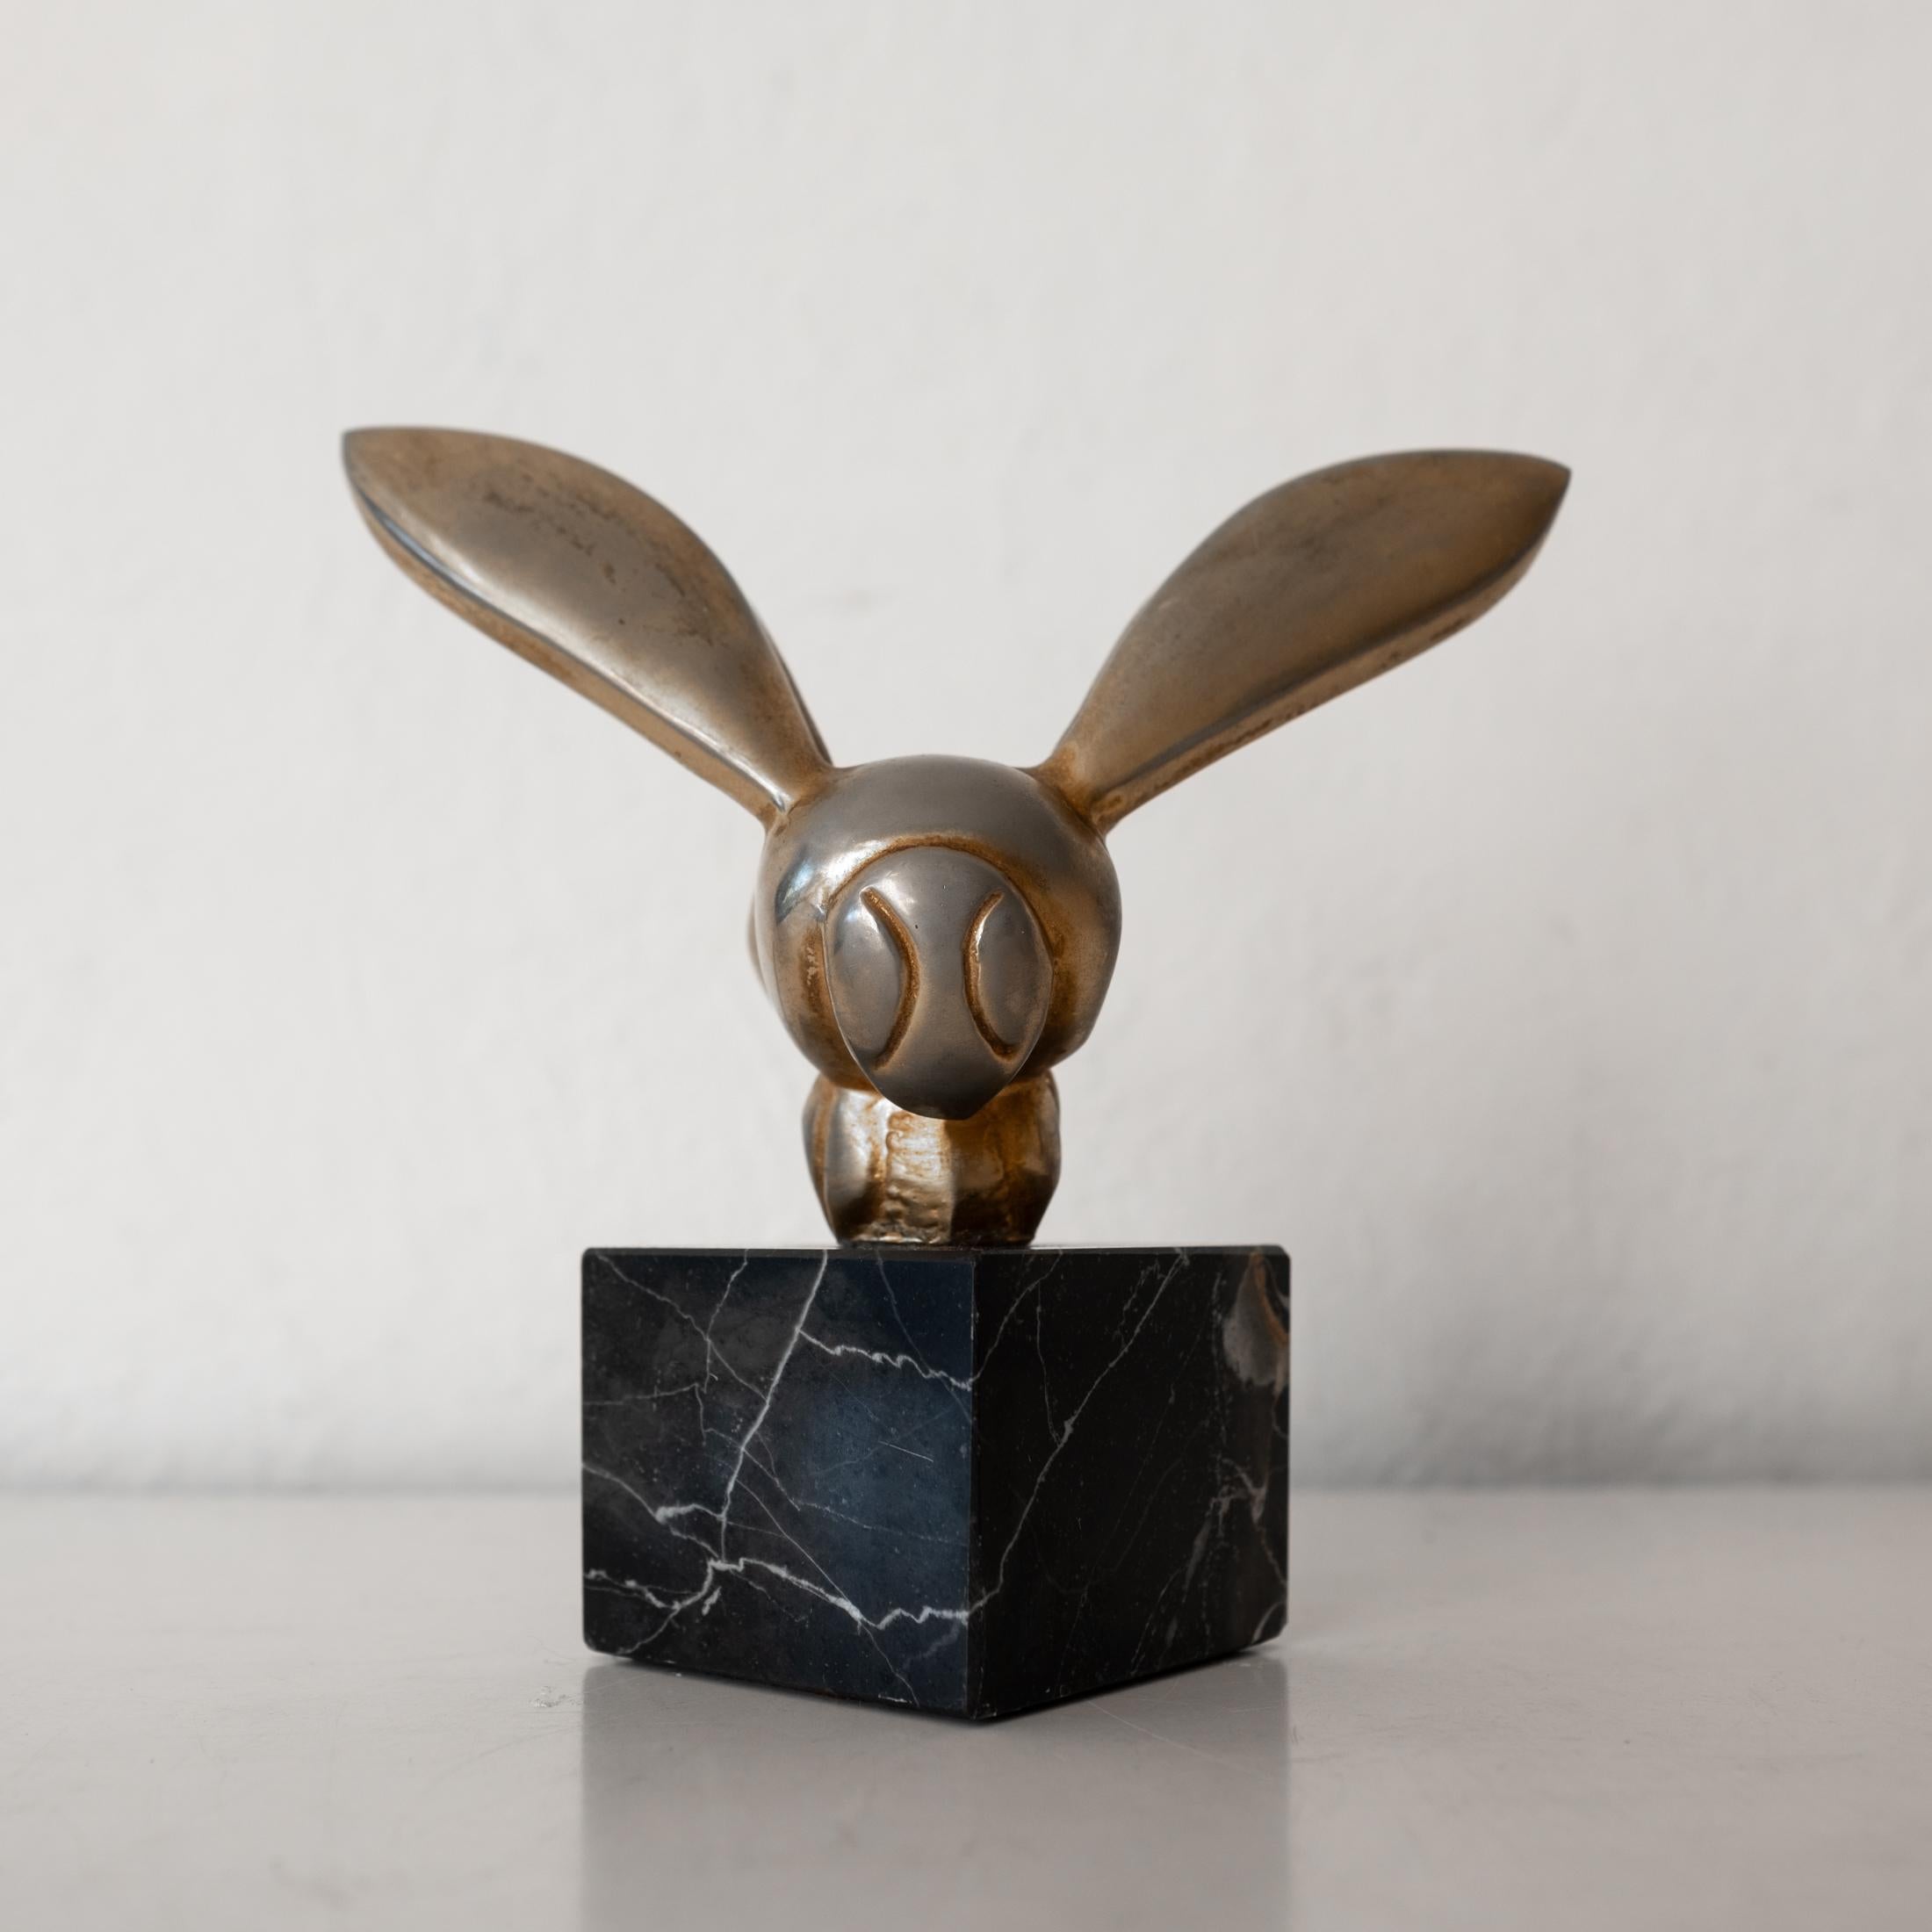 Gaston Lachaise for Alva Studios abstracted insect sculpture for the Philadelphia Museum of art. Black marble base. Retains the original foil label. Signed under the wing. 

Gaston Lachaise (March 19, 1882 – October 18, 1935) was a French-born